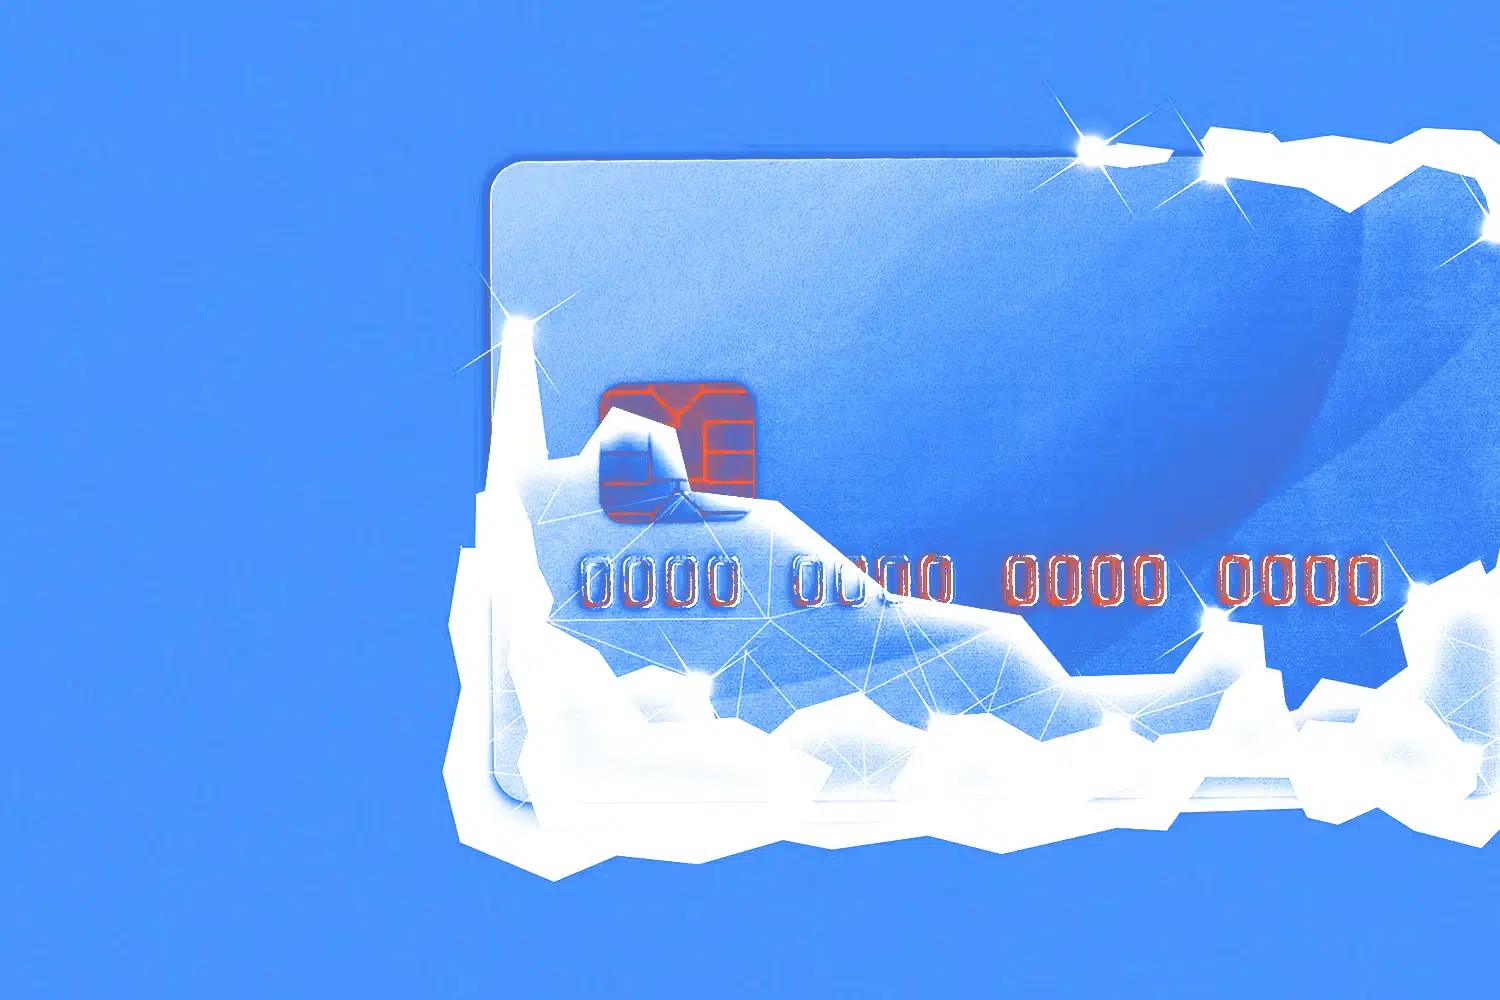 Credit card covered in frost